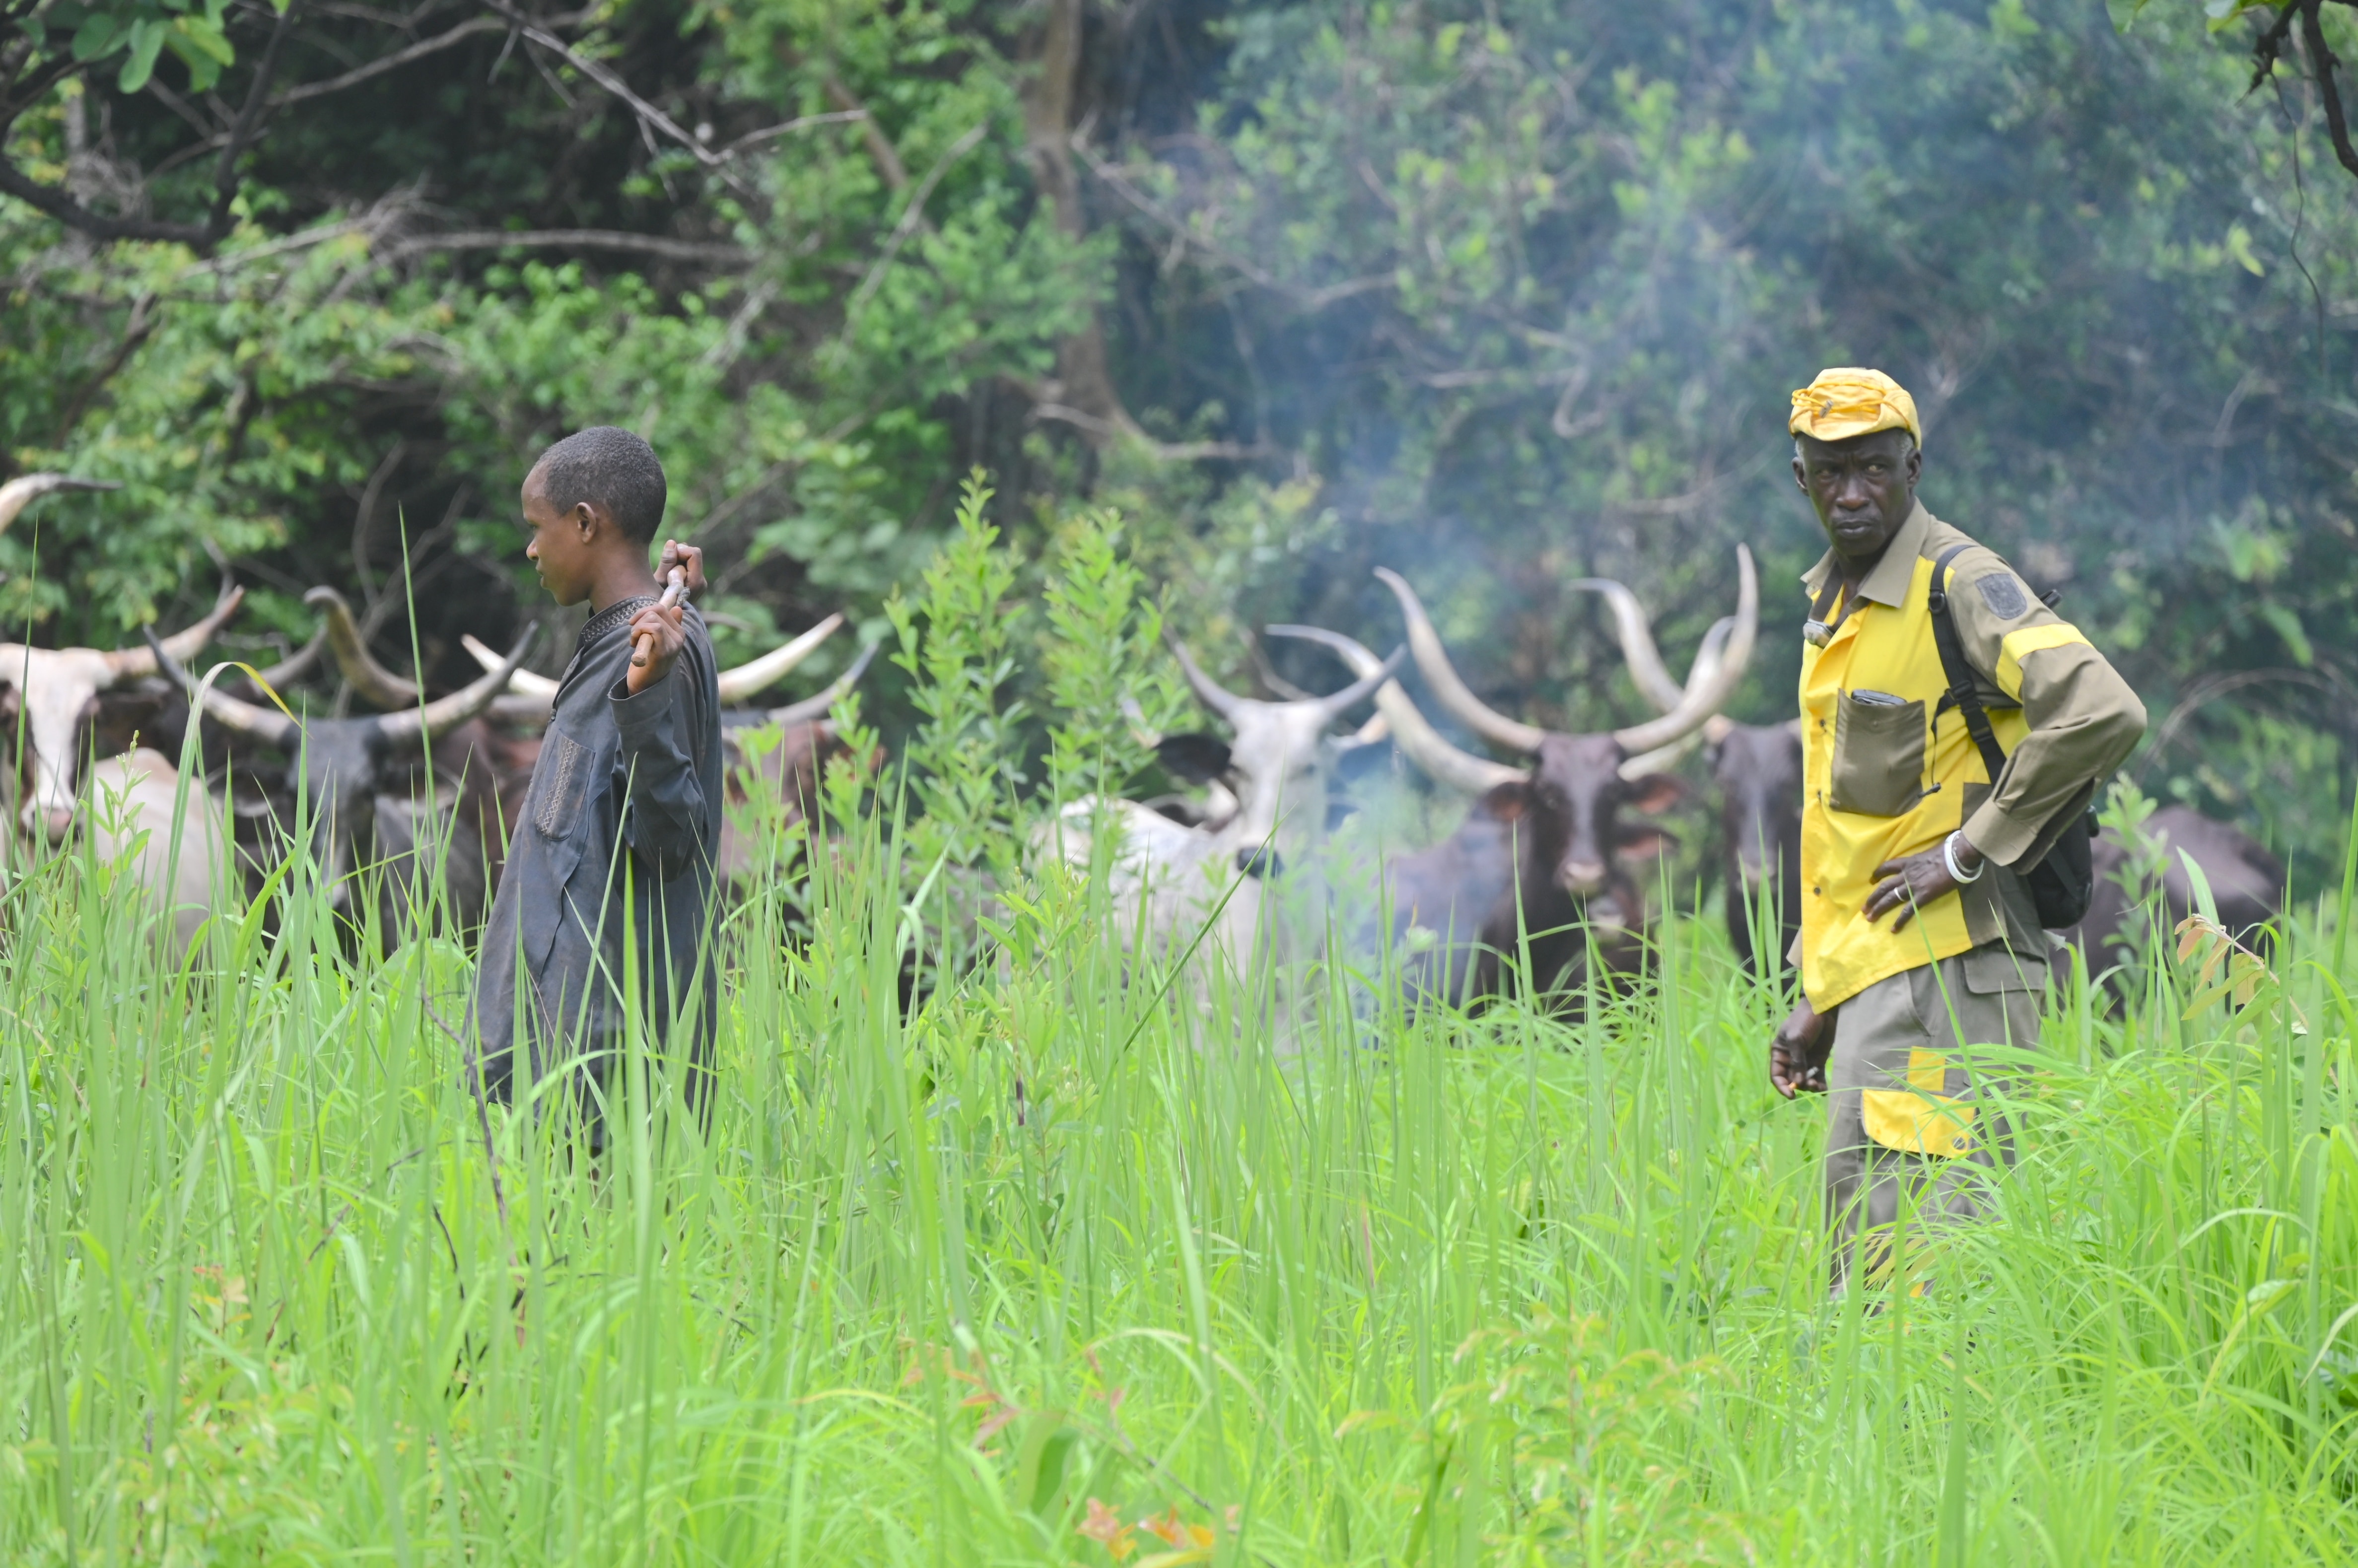 Two men stand in front of cattle near a forest.